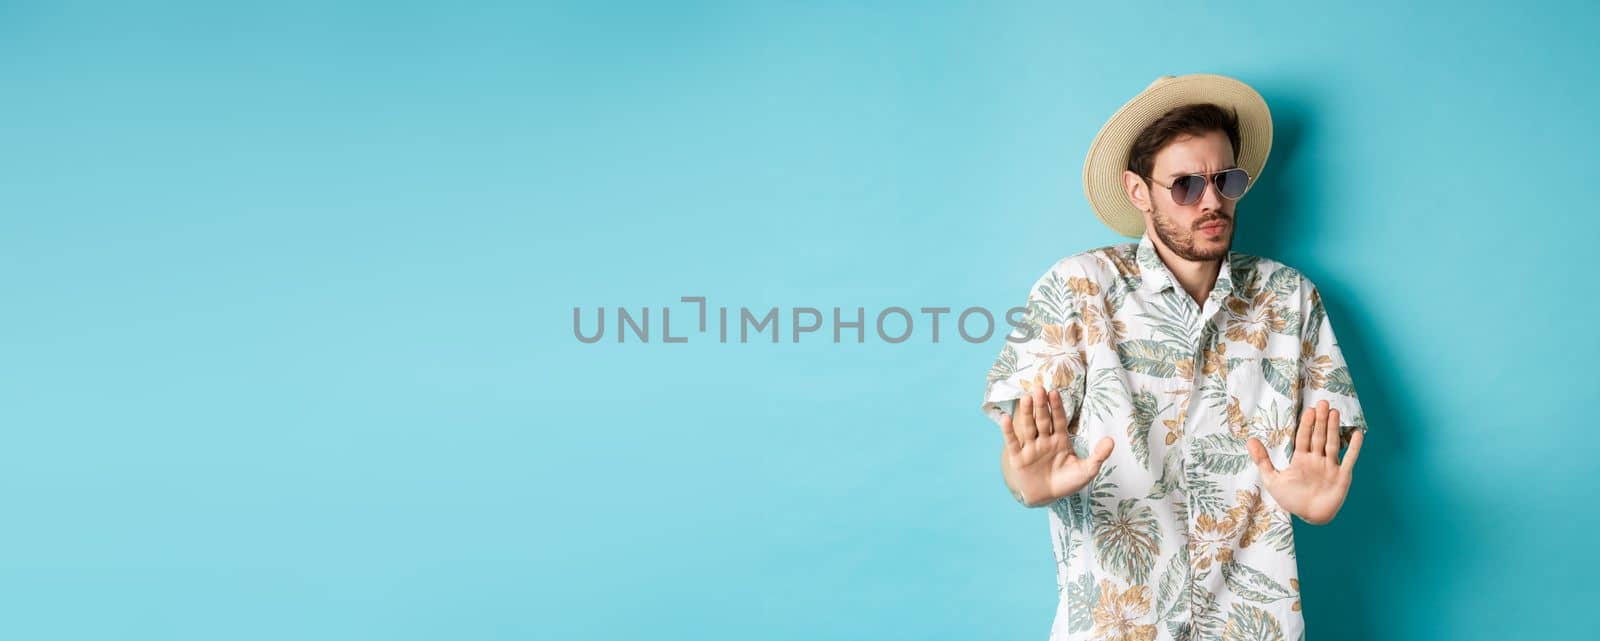 Alarmed tourist asking to stay away, step back from something cringe, showing rejection gesture, standing in straw hat and hawaiian shirt, blue background by Benzoix